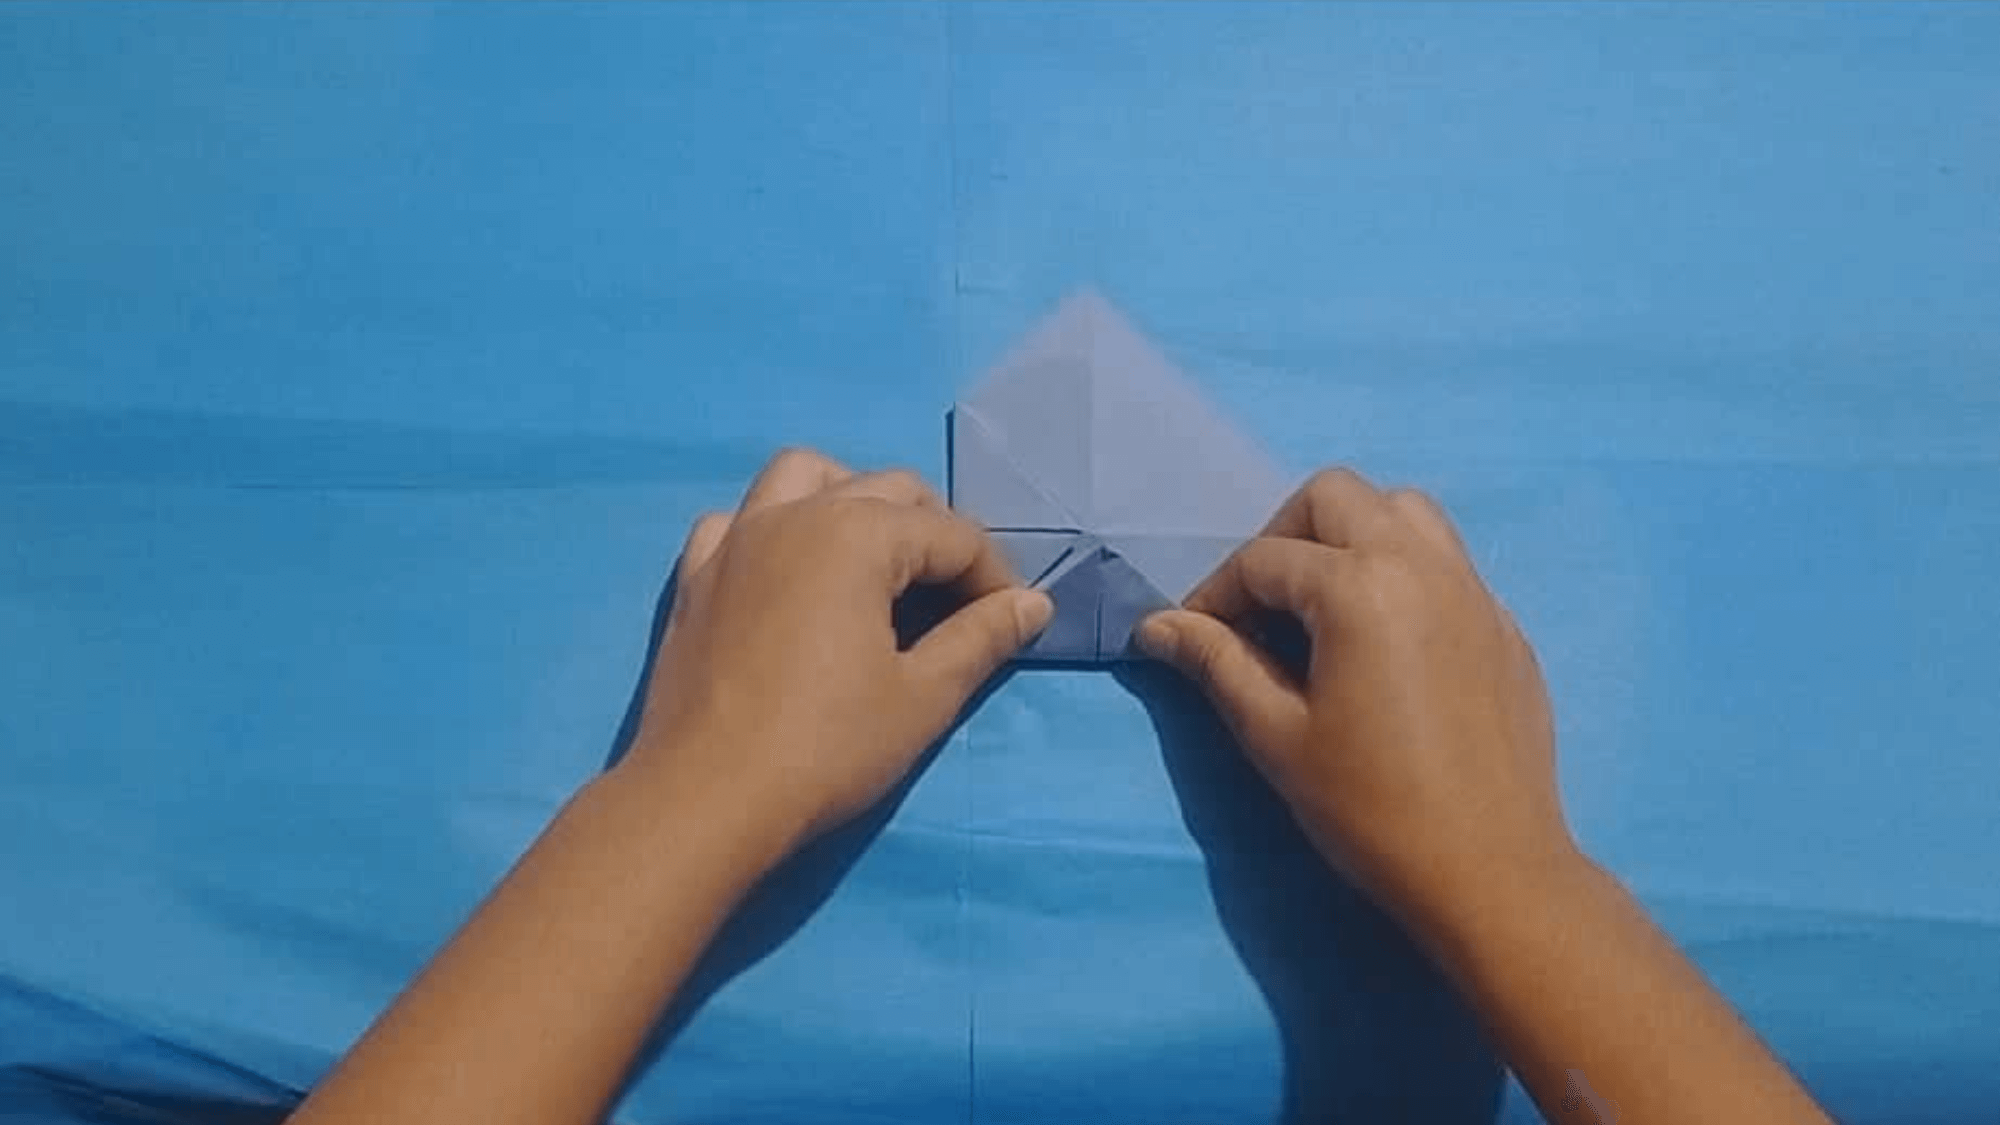 origami lotus flower instructions step 7.1